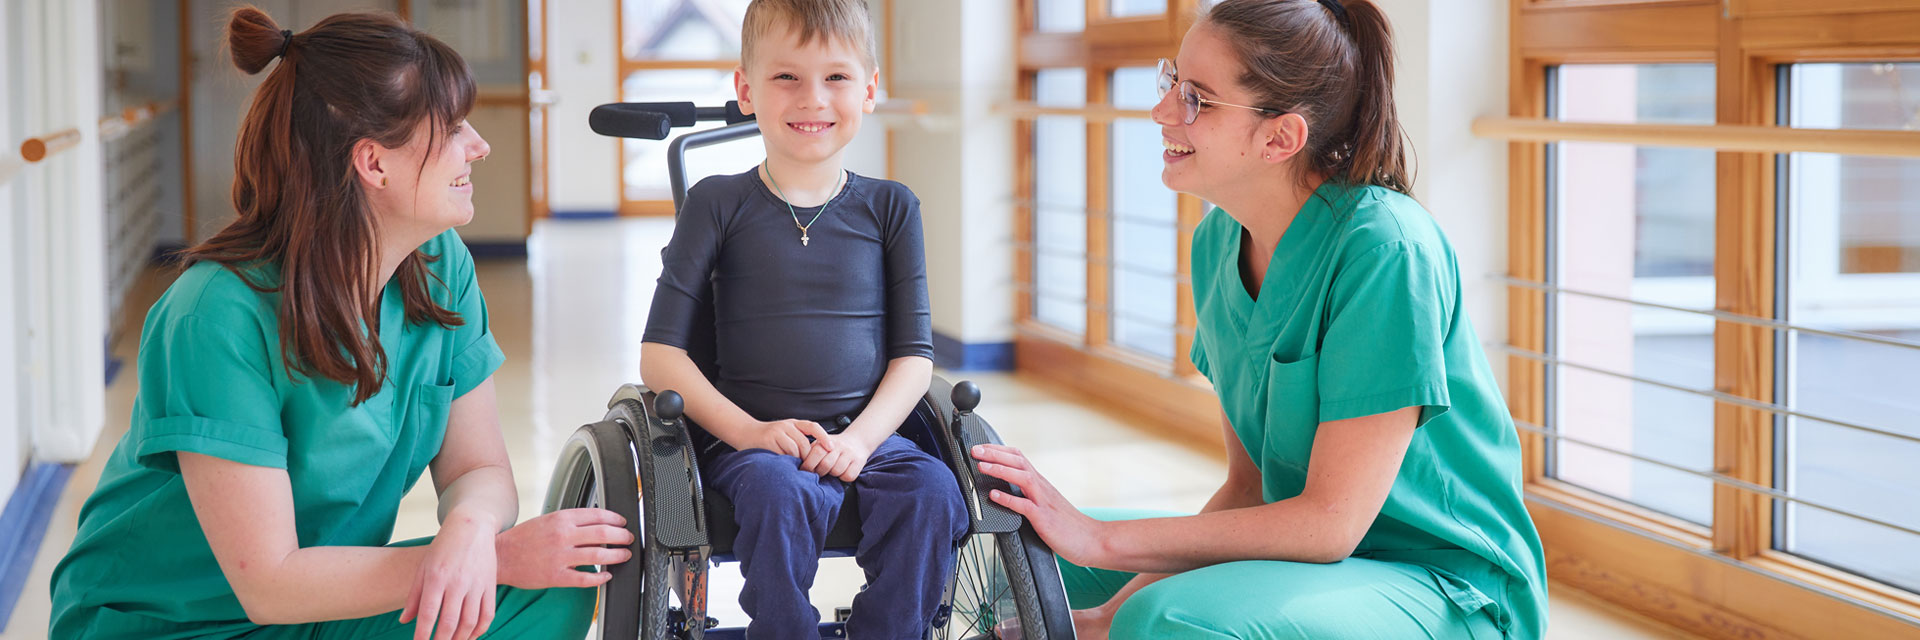 Picture: Two nurses from the children's hospital communicate with a boy in a wheelchair.